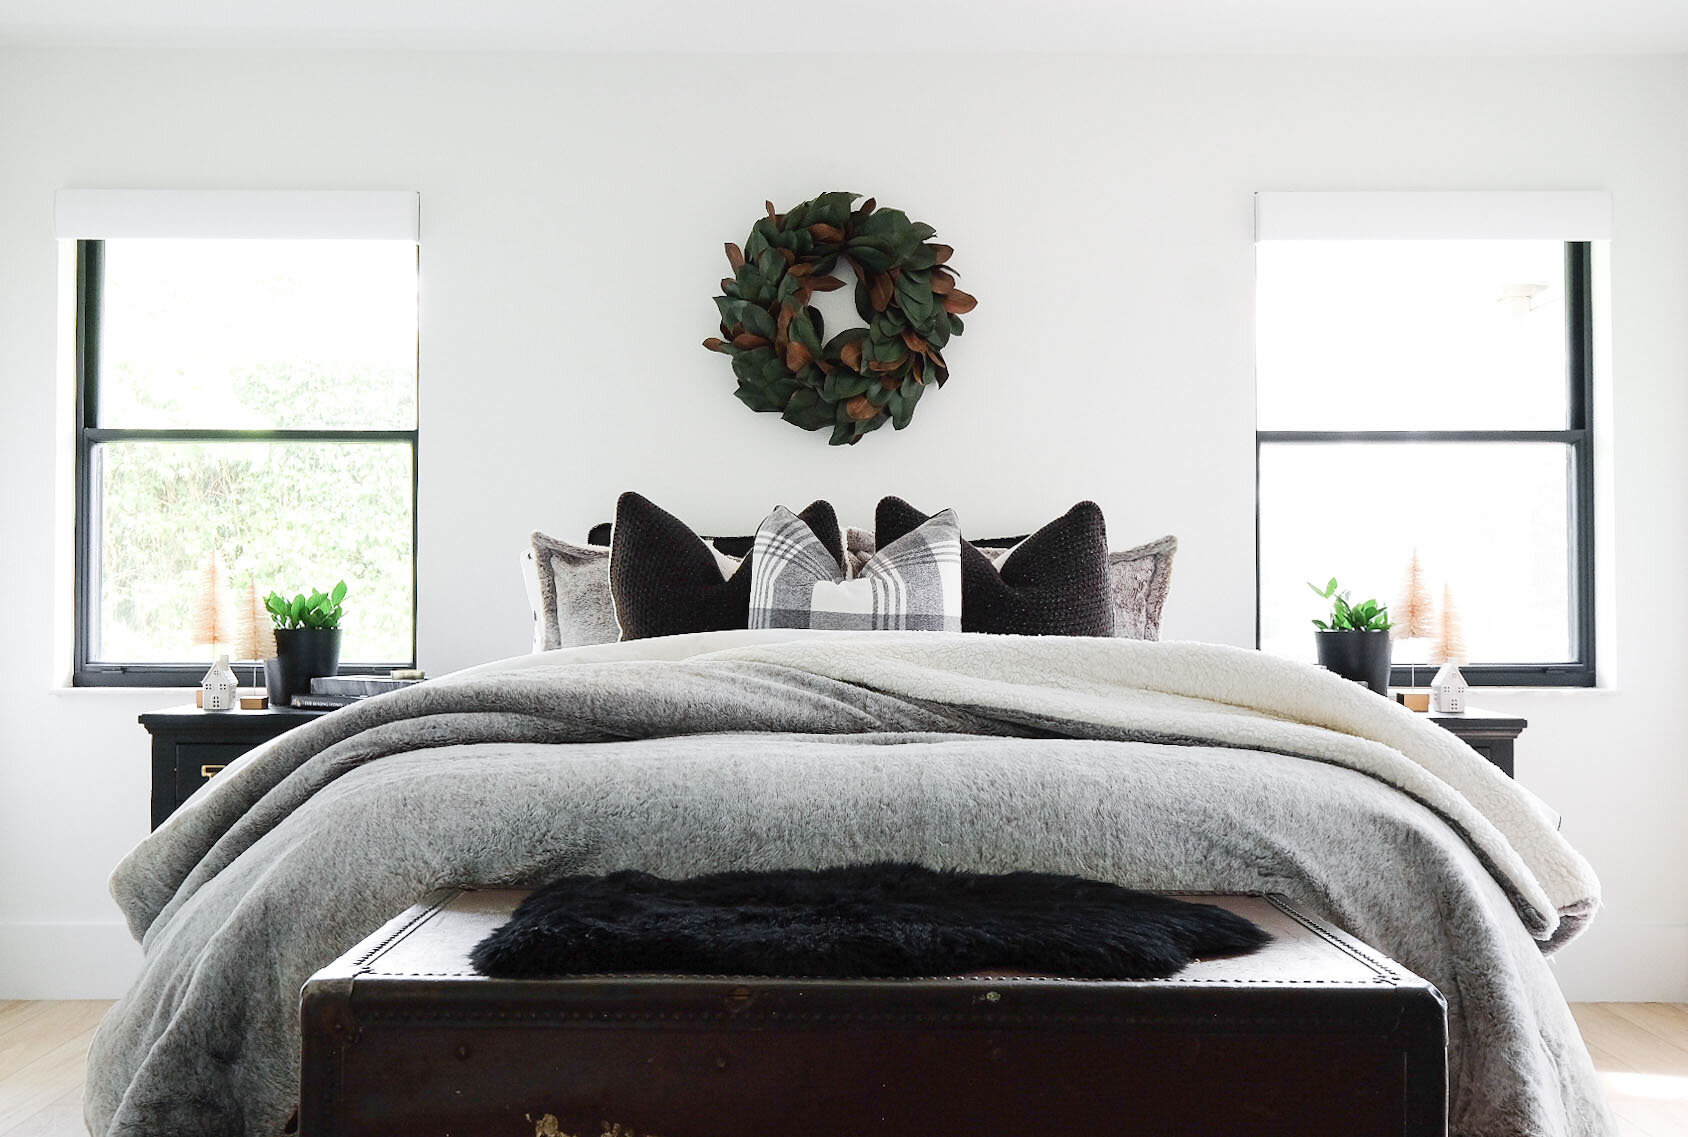 CHRISTMAS DECOR 2020 // OUR MASTER BEDROOM — Me and Mr. Jones